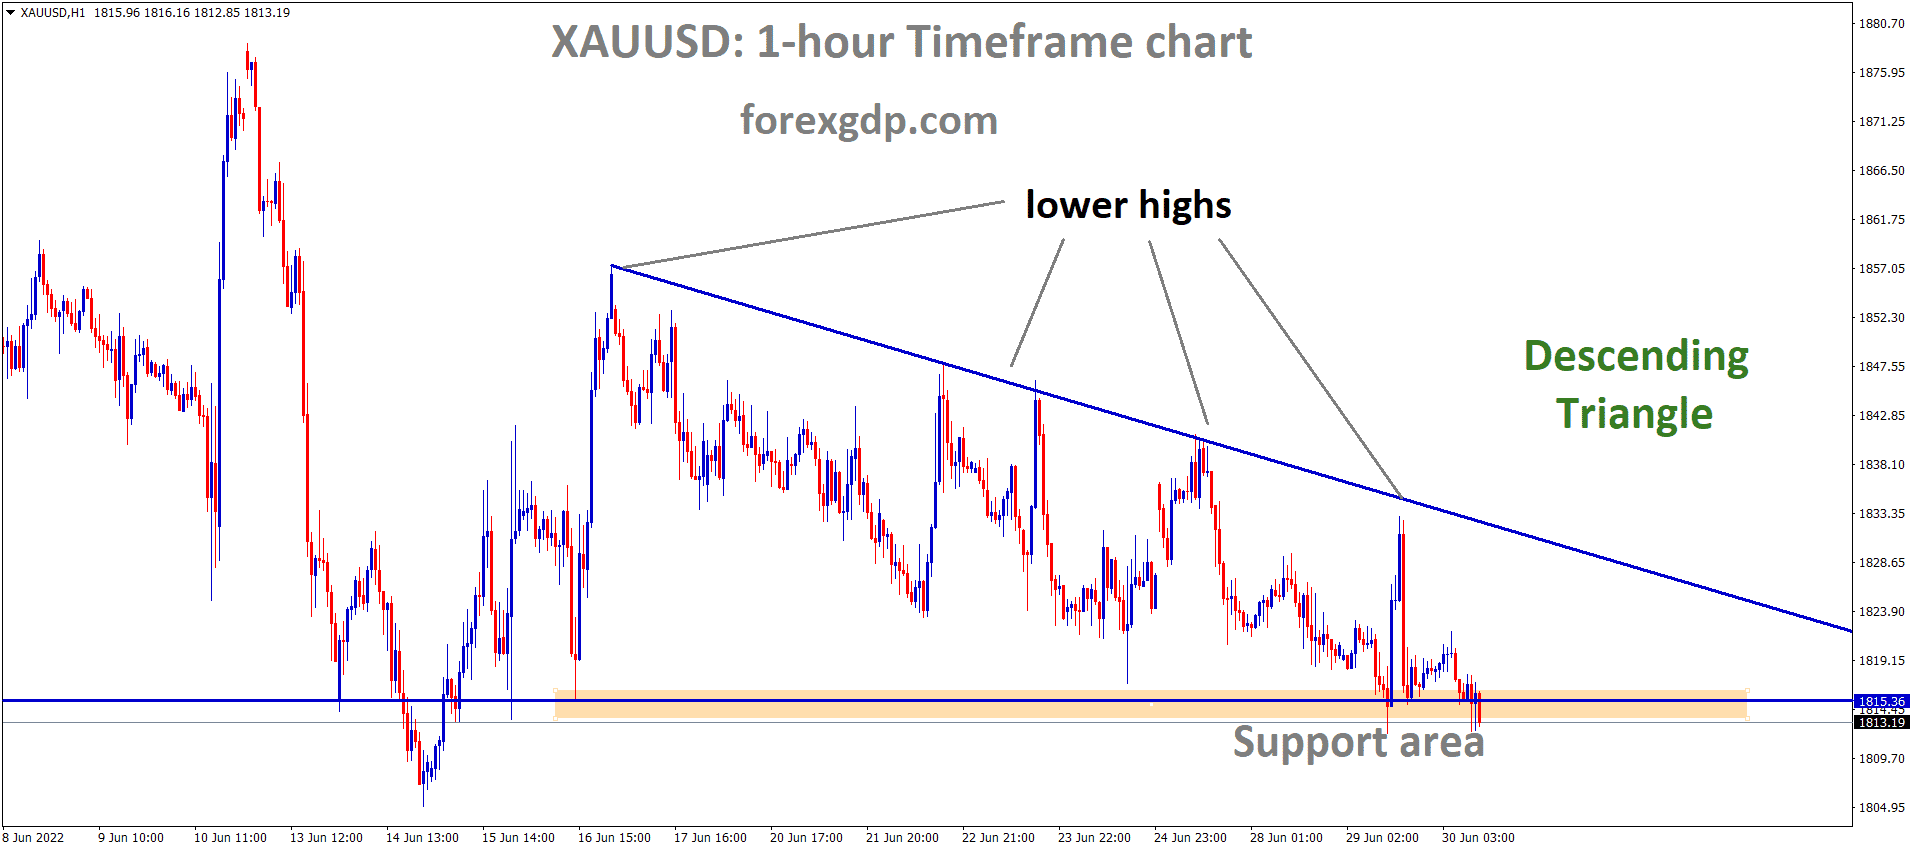 XAUUSD Gold price is moving in the Descending triangle pattern and the Market has reached the horizontal support area of the Pattern.